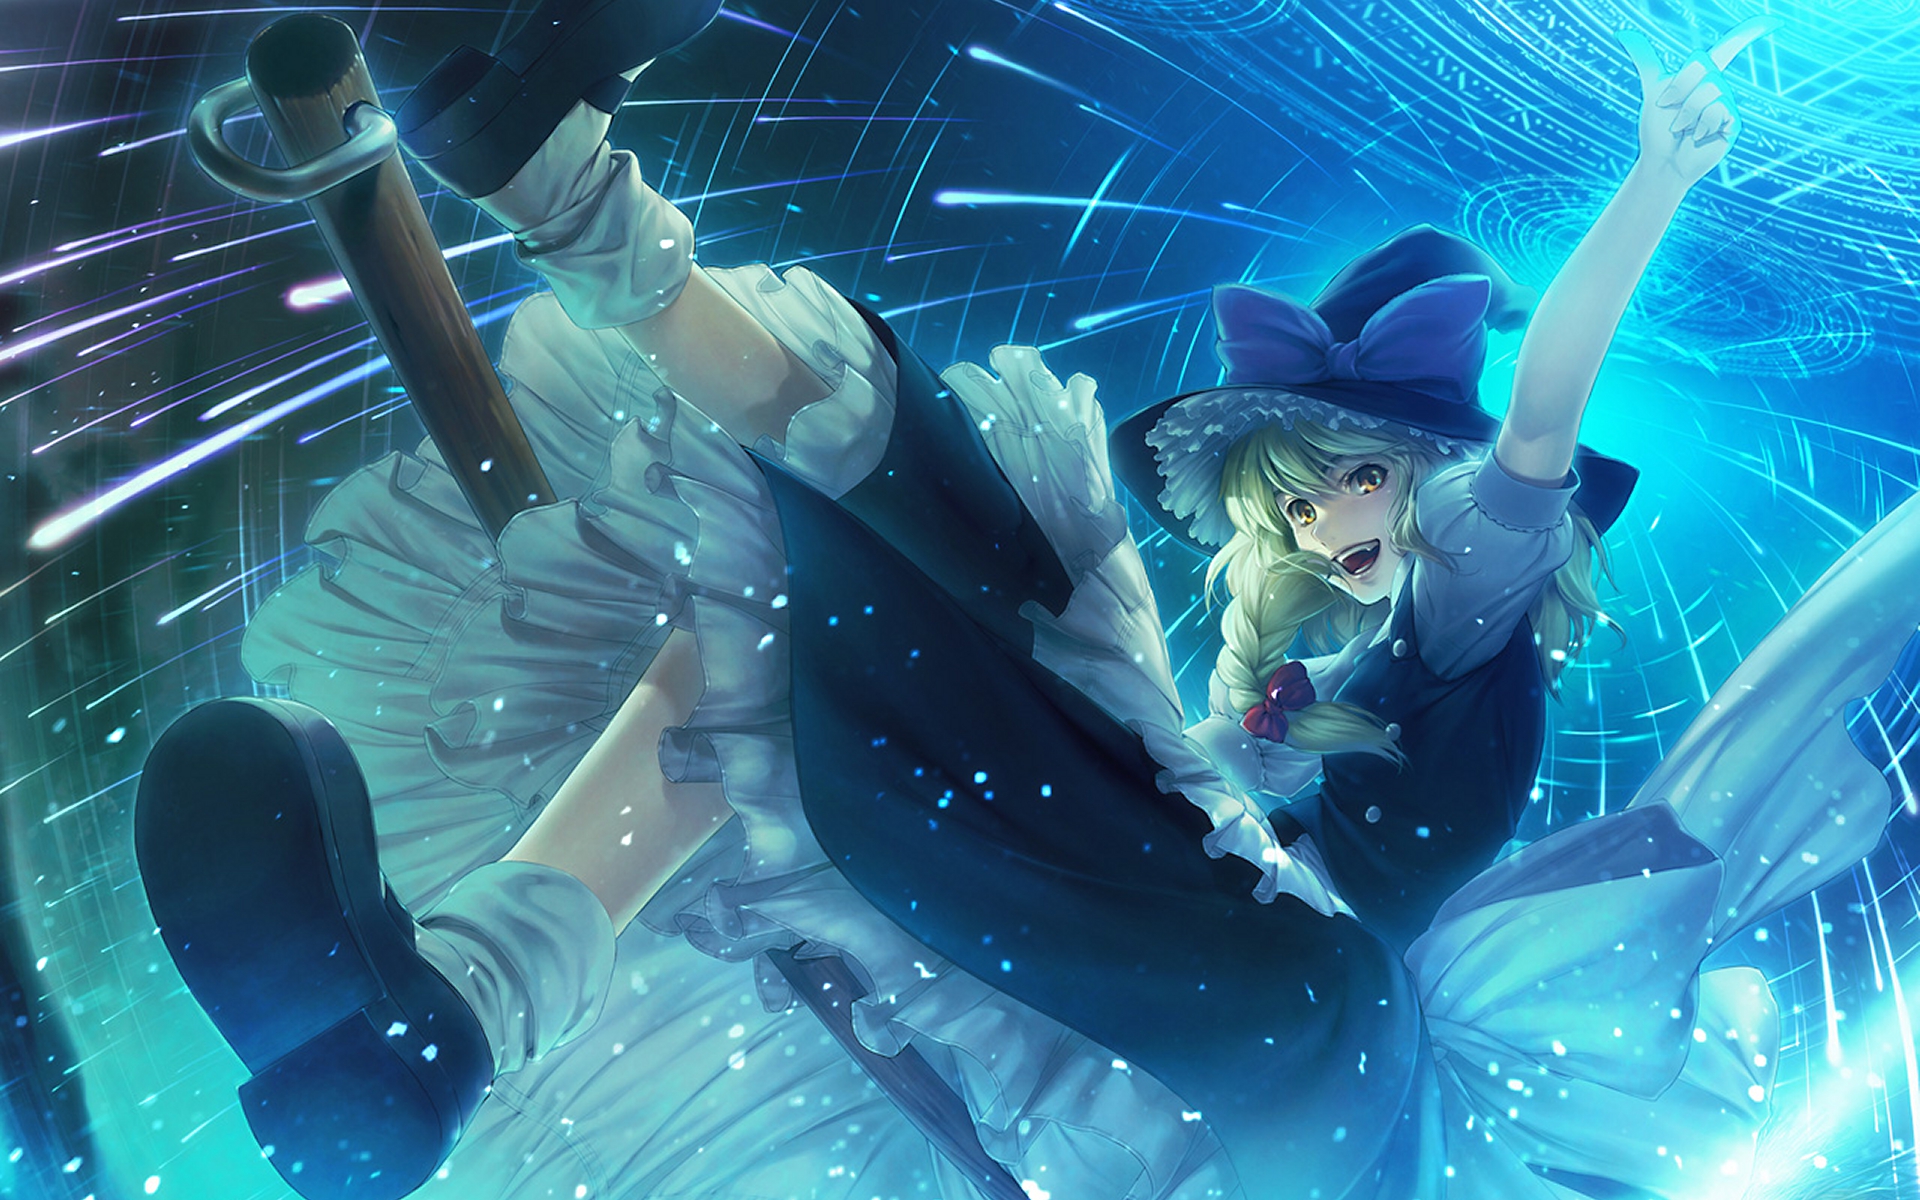 Free Download Touhou Wallpaper Pack 7 Randomness Thing 19x10 For Your Desktop Mobile Tablet Explore 47 Touhou Wallpaper Pack Sakuya Izayoi Wallpaper Hd Wallpapers Touhou Touhou Wallpaper 19x1080